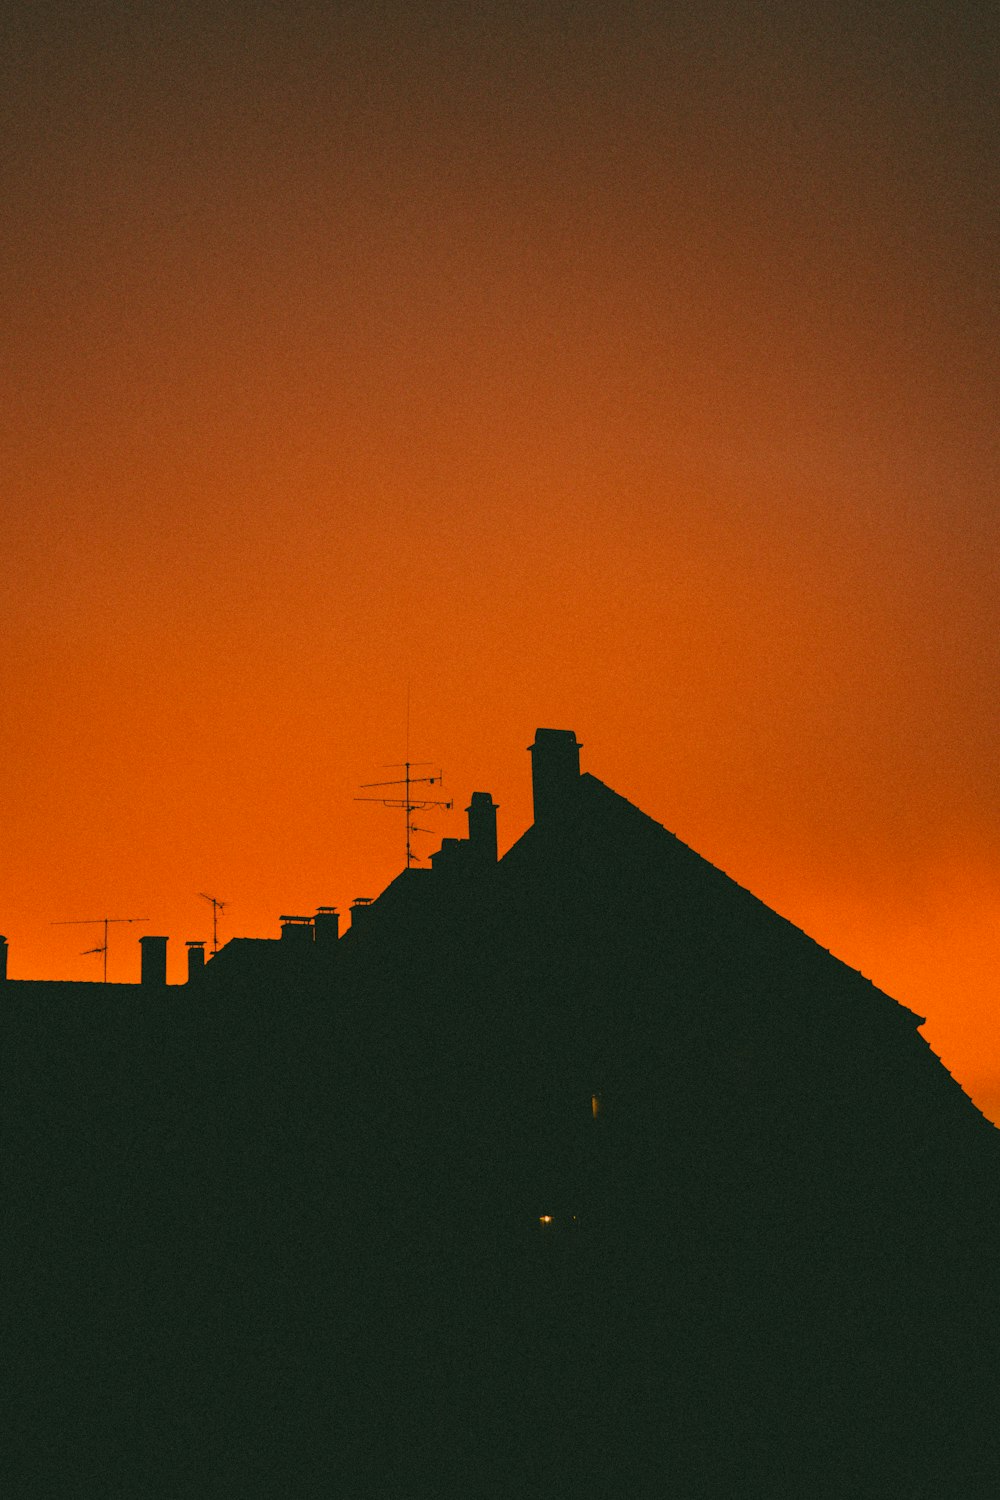 silhouette of building during sunset